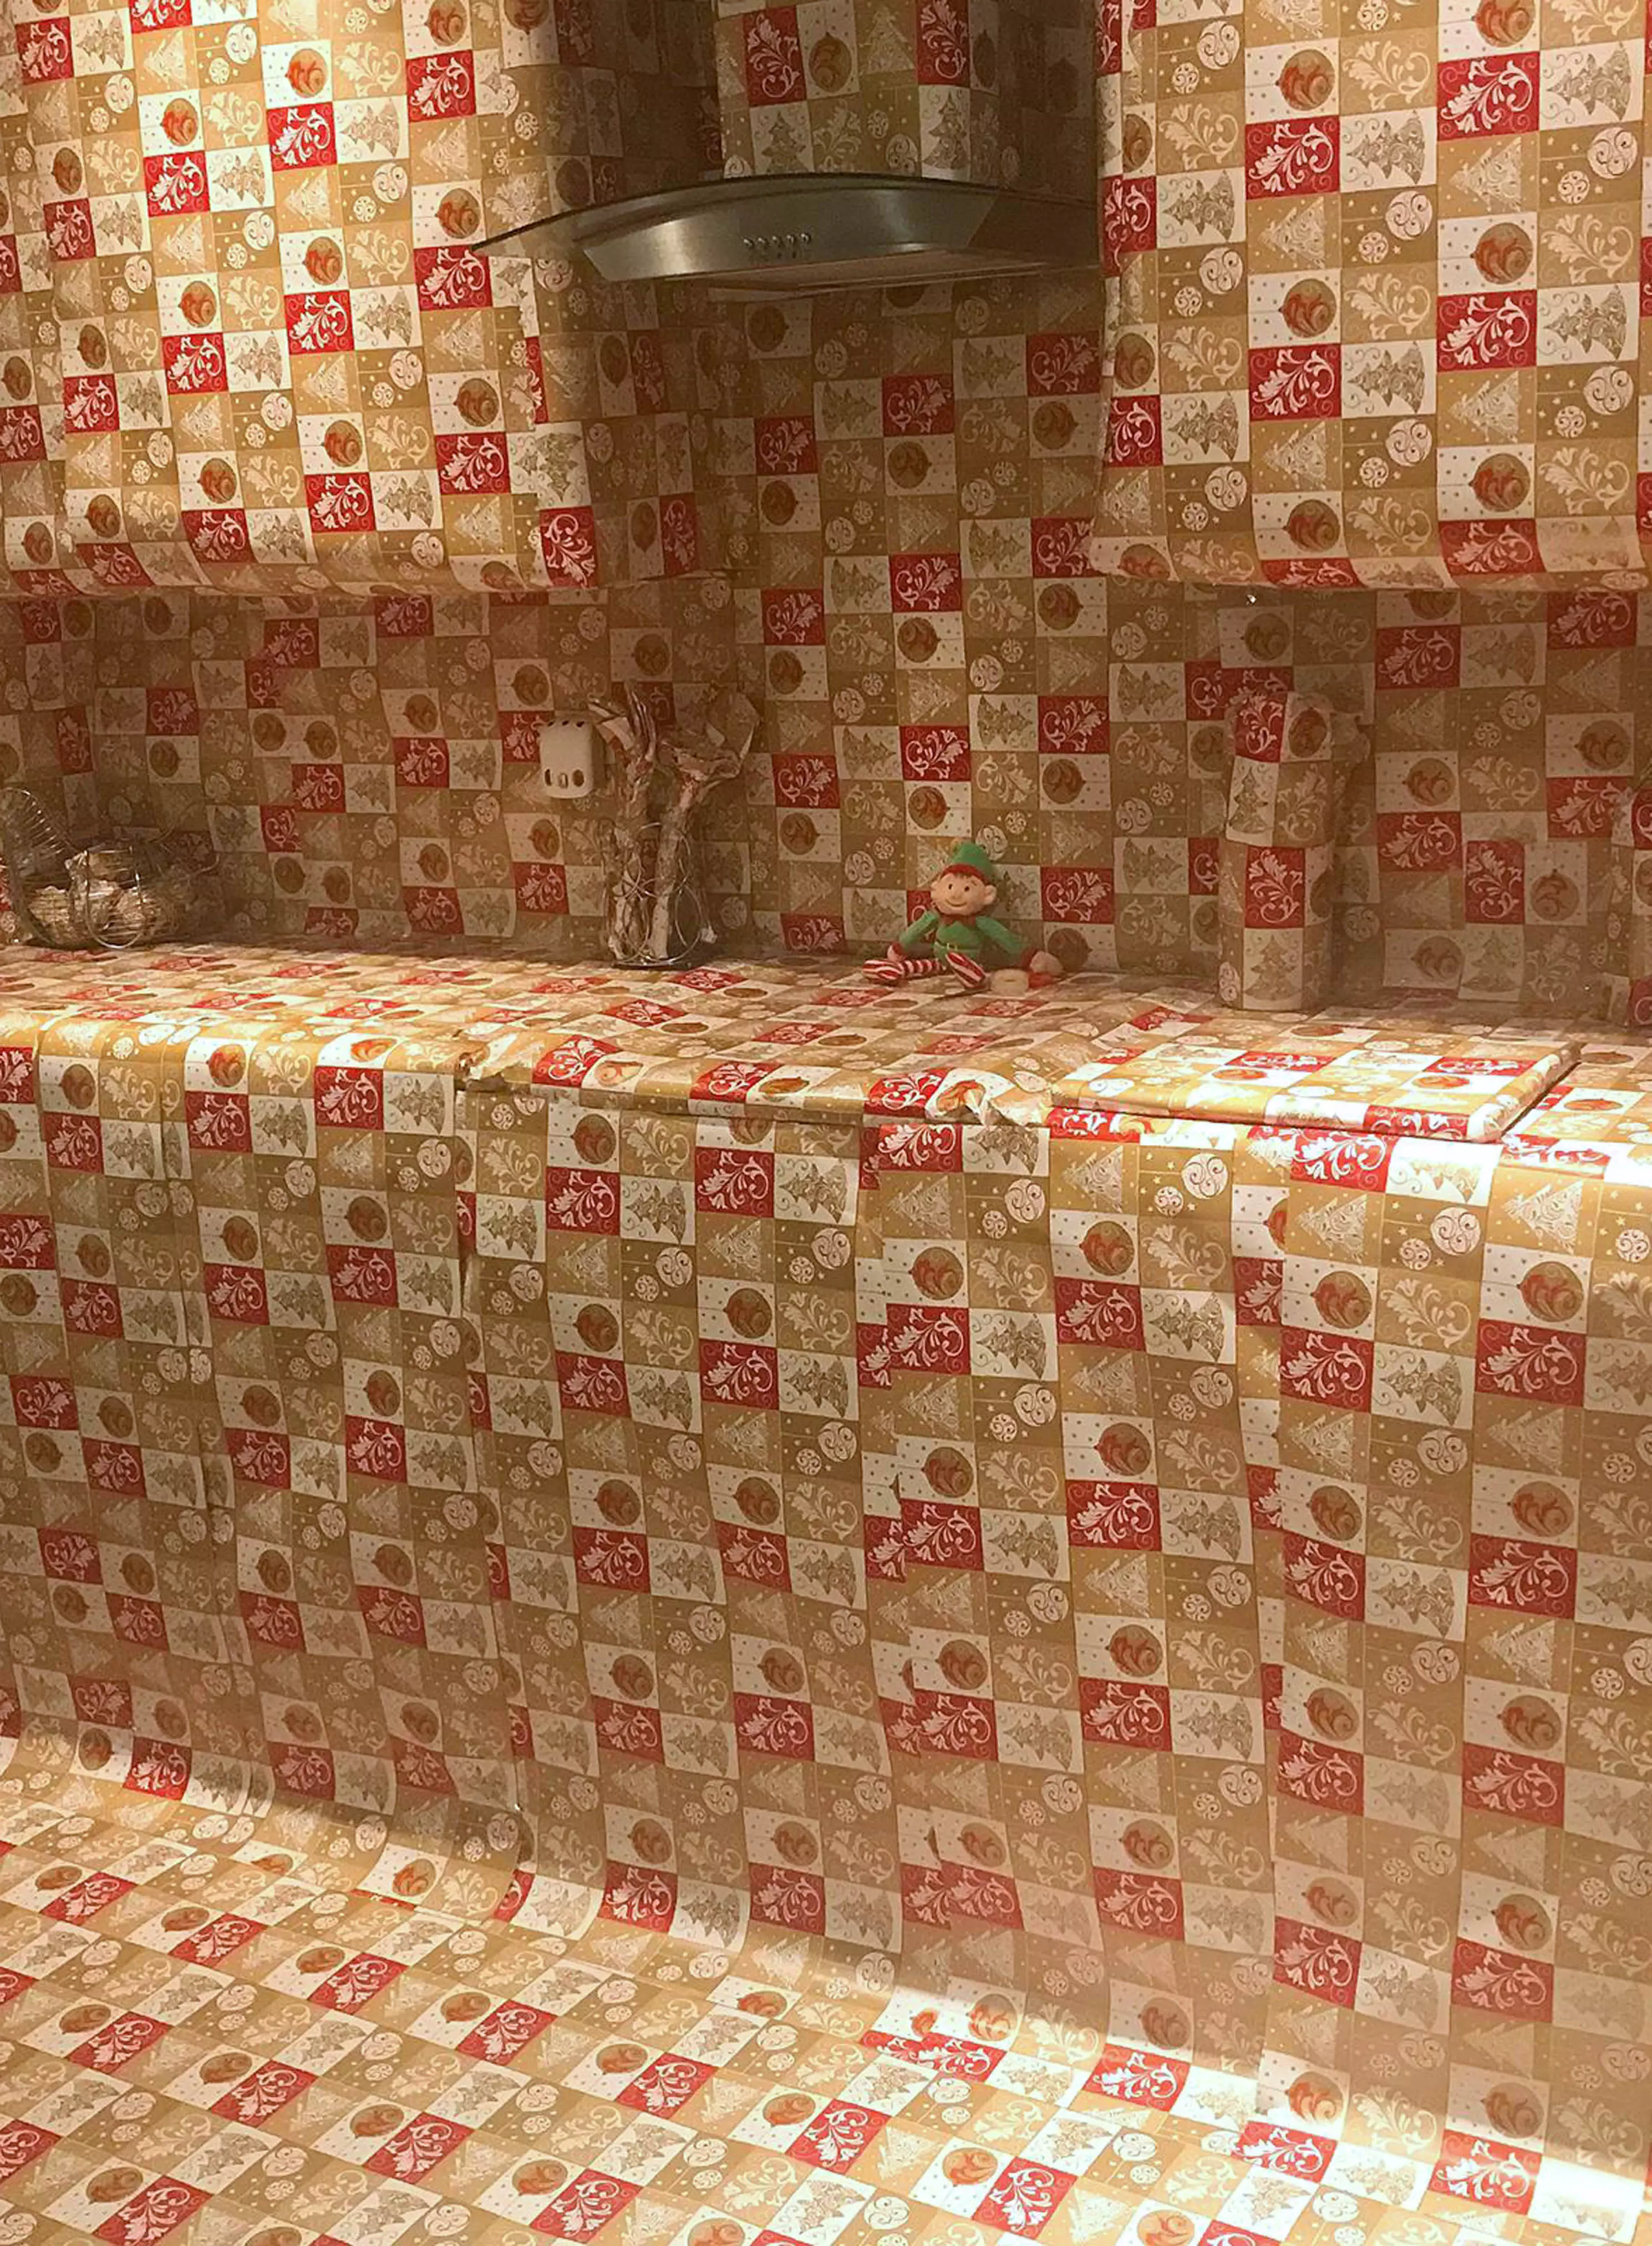 These parents played a prank on their six-year-old son and wrapped their kitchen in Christmas paper. (